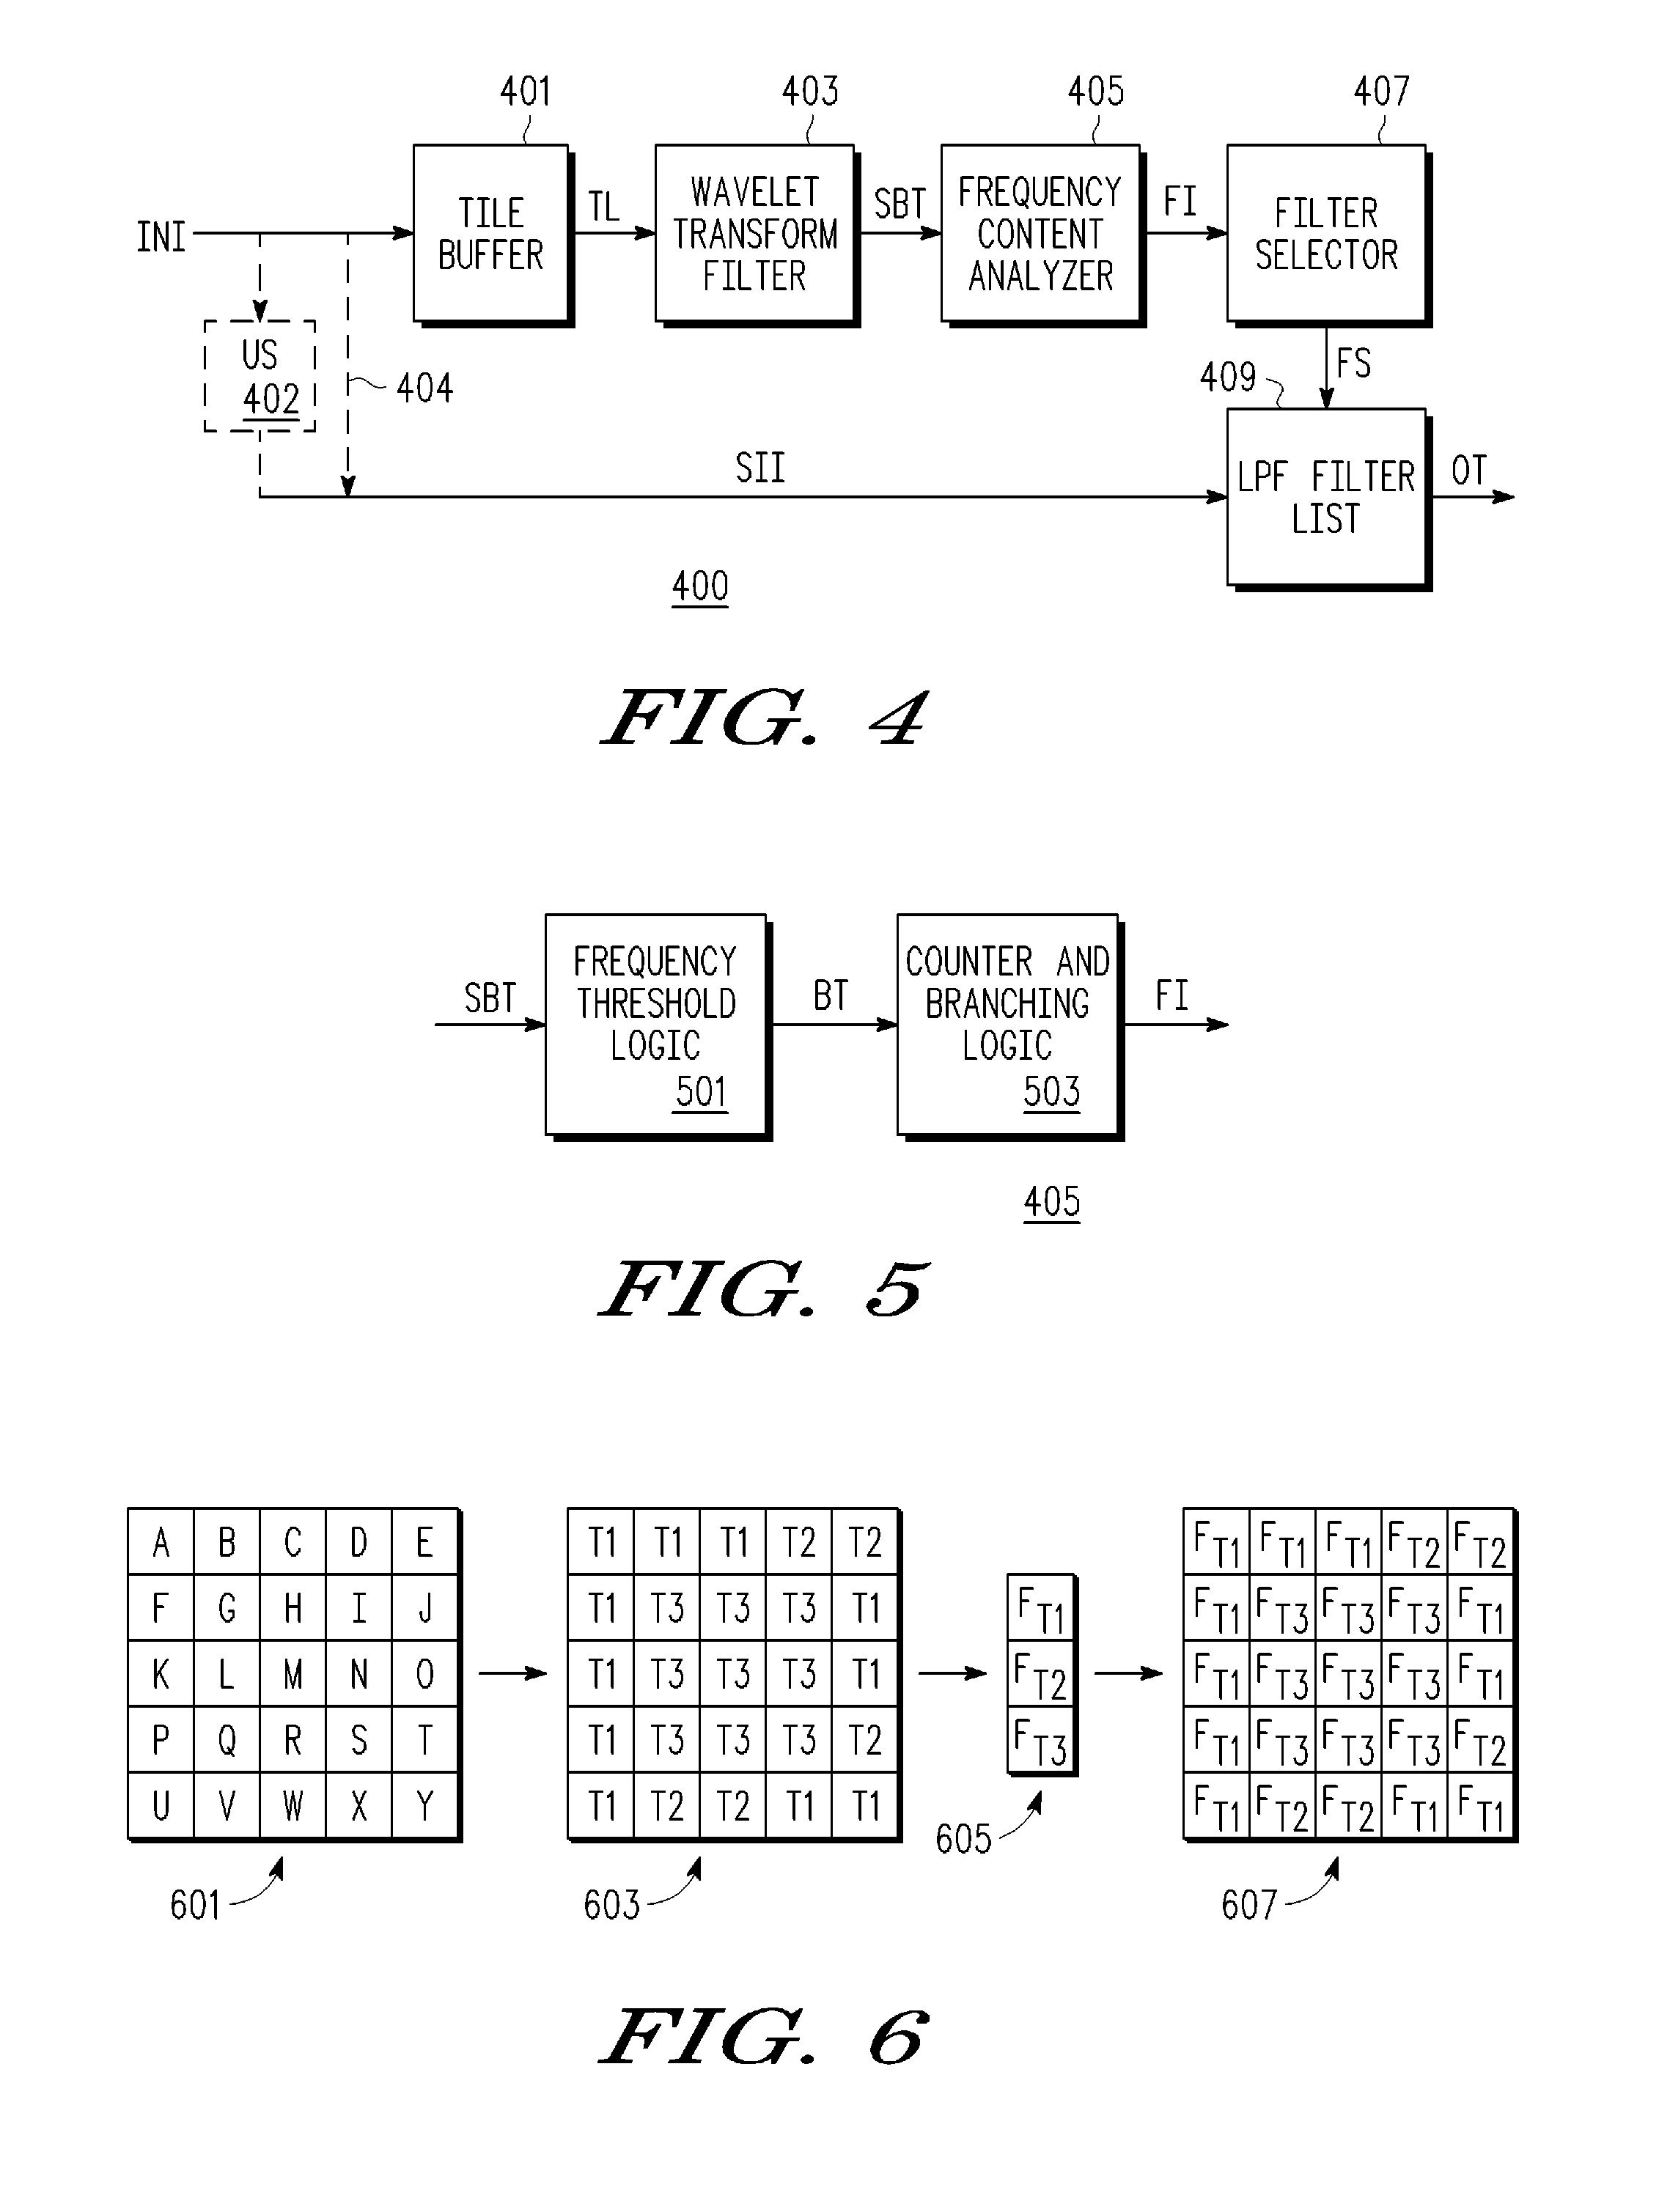 Localized content adaptive filter for low power scalable image processing